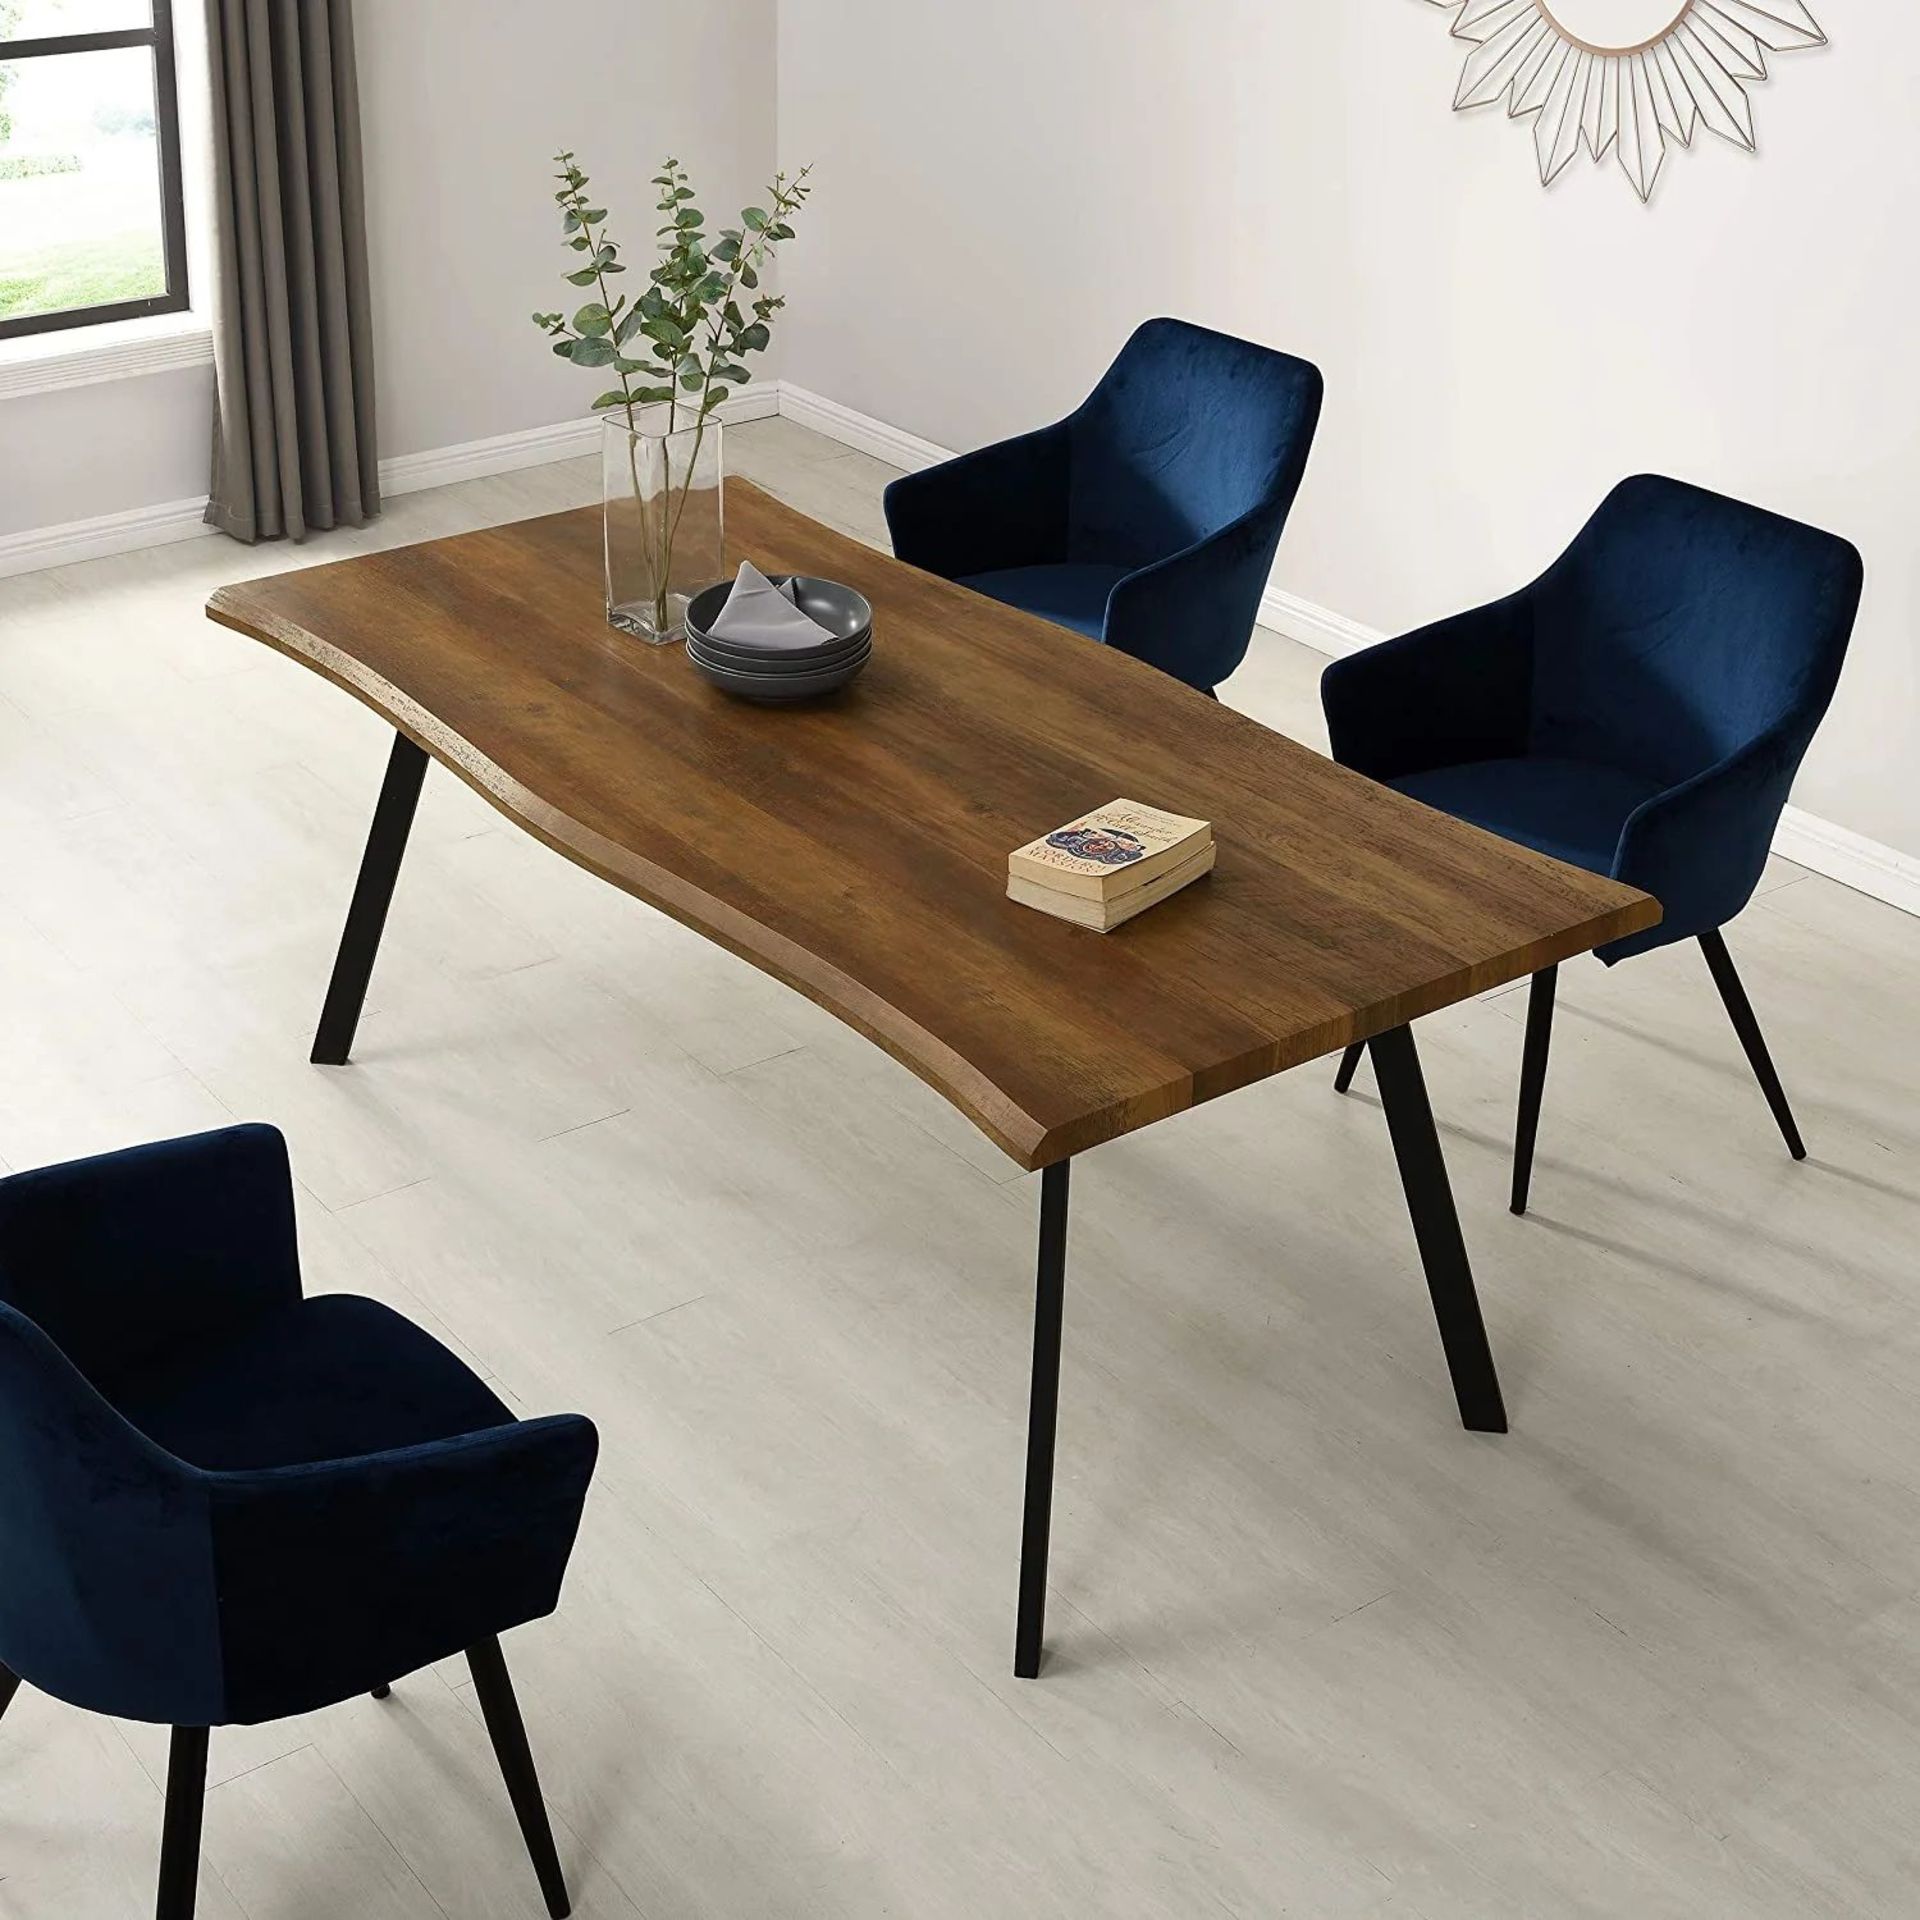 Kenora Wood Effect 150 cm Dining Table with Curved Edges 4 Seater. - SR3. RRP £329.99. Featuring